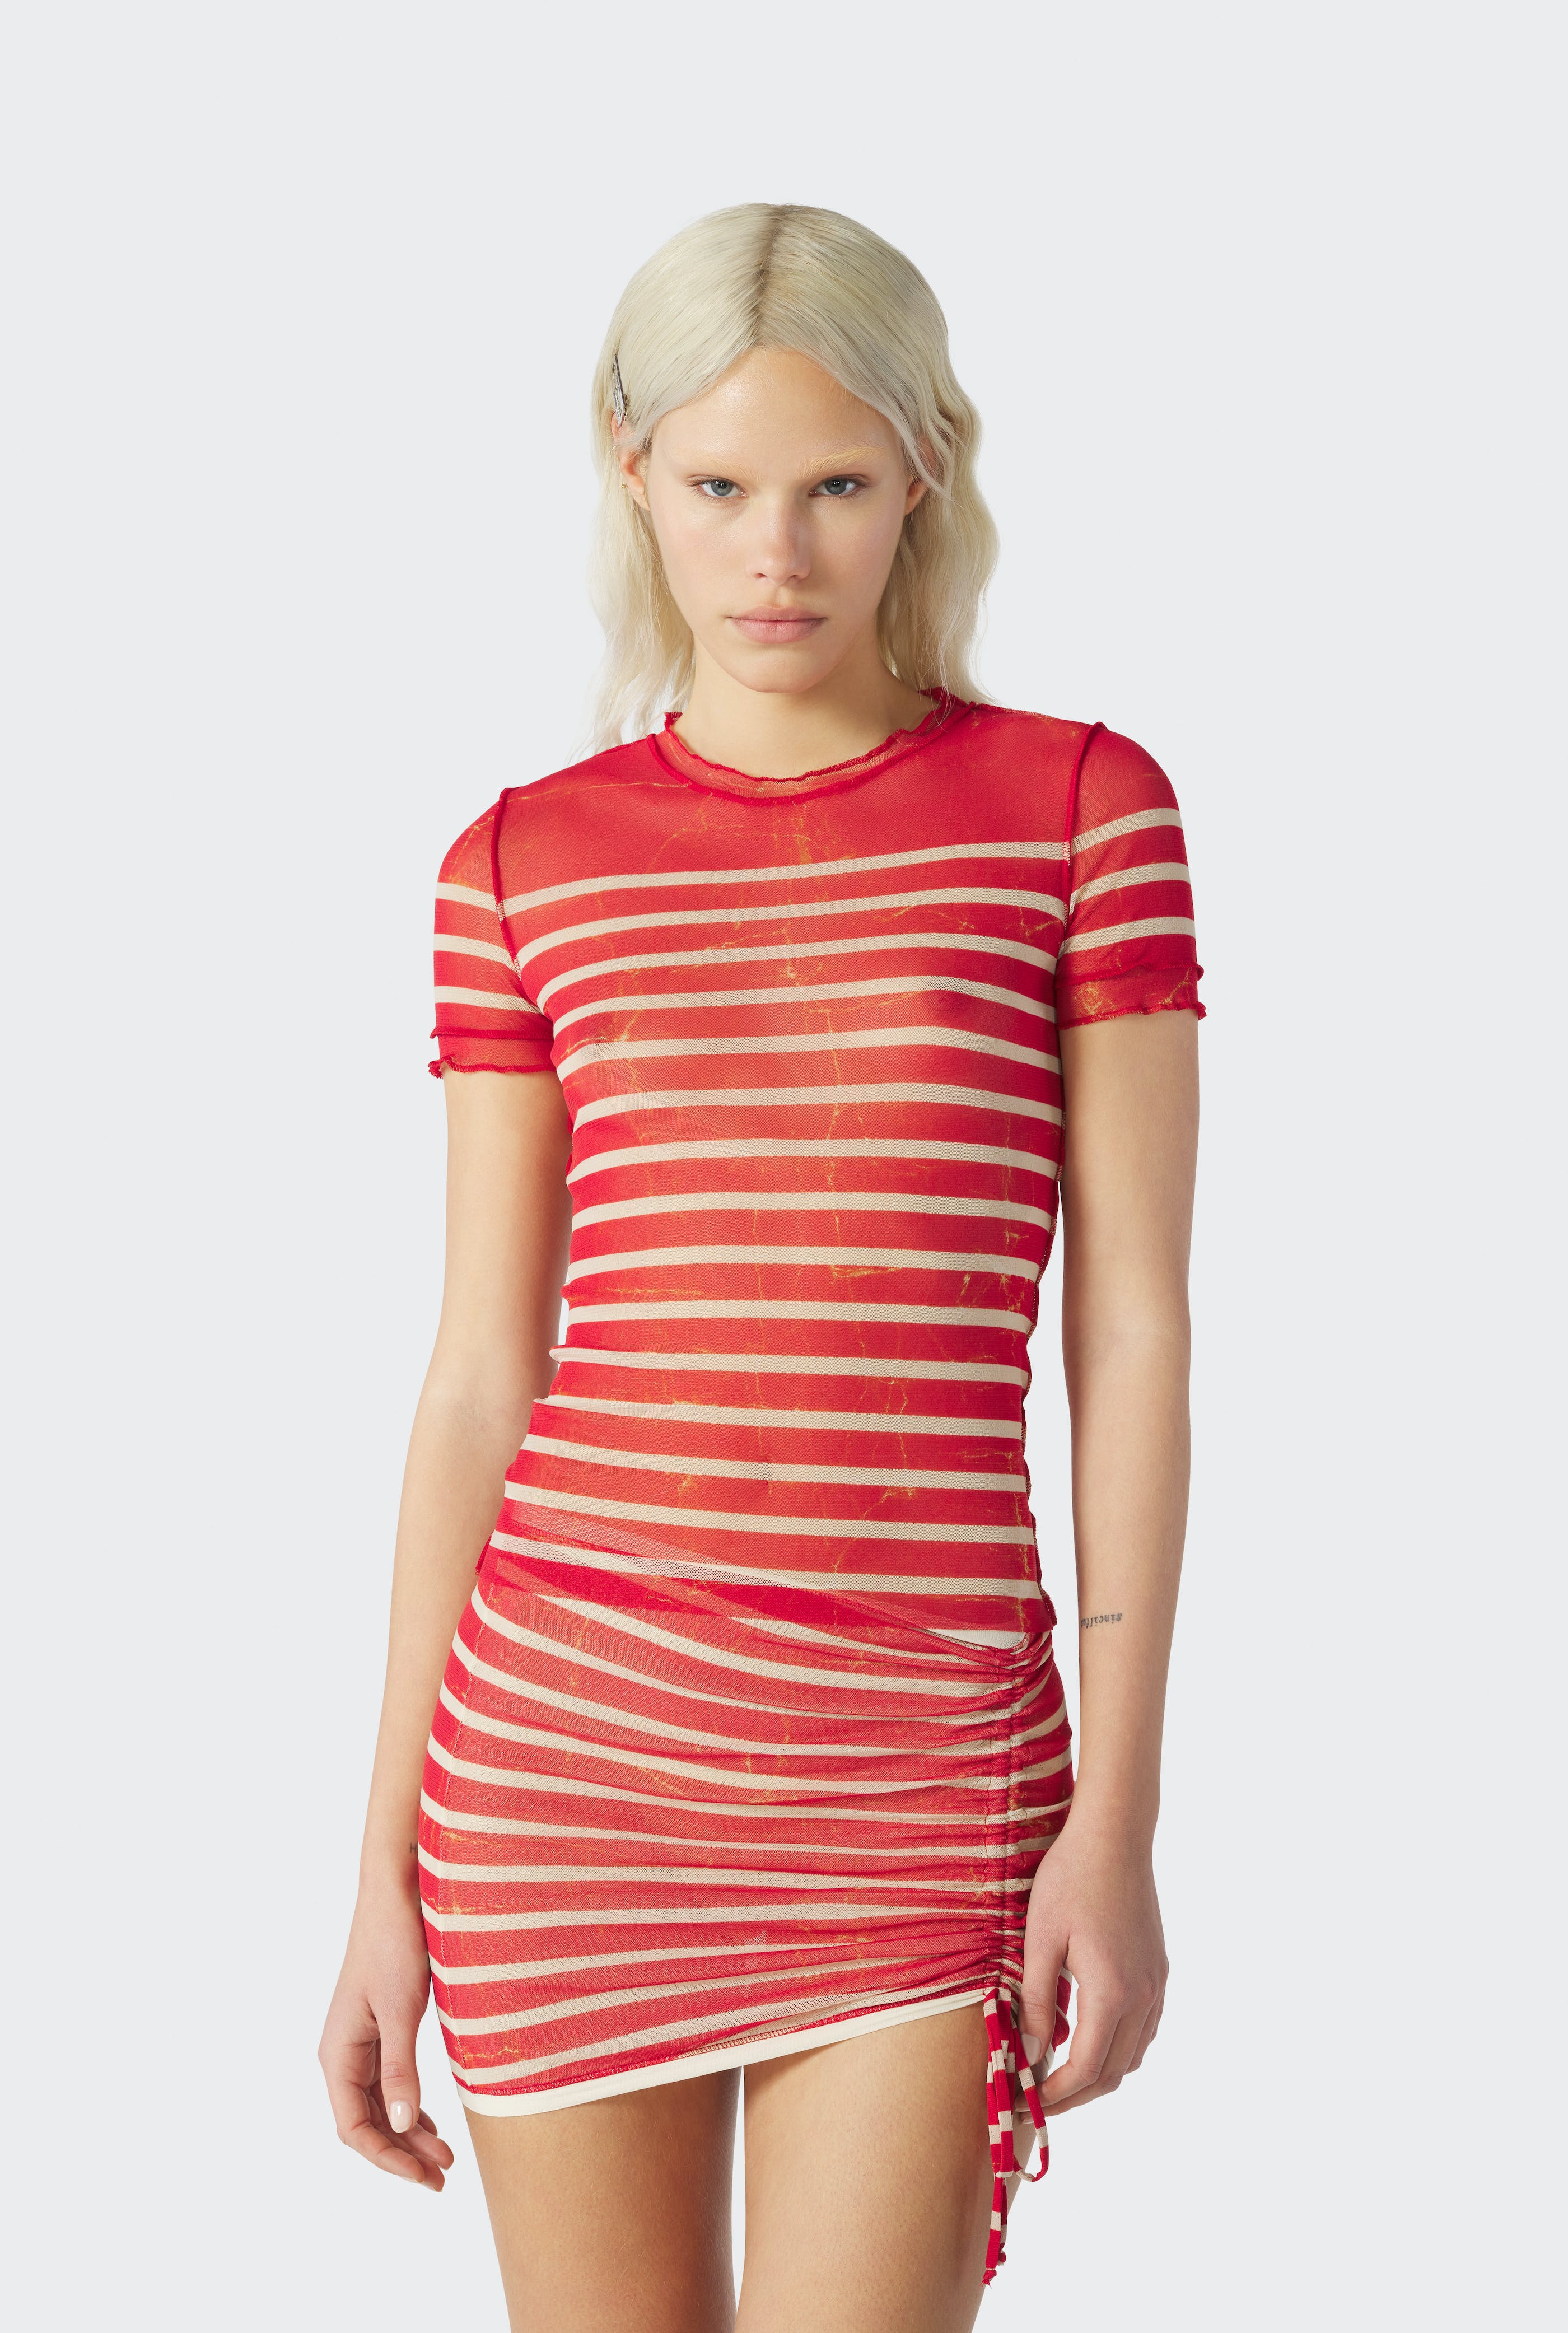 The Red “Crackling” Sailor Top